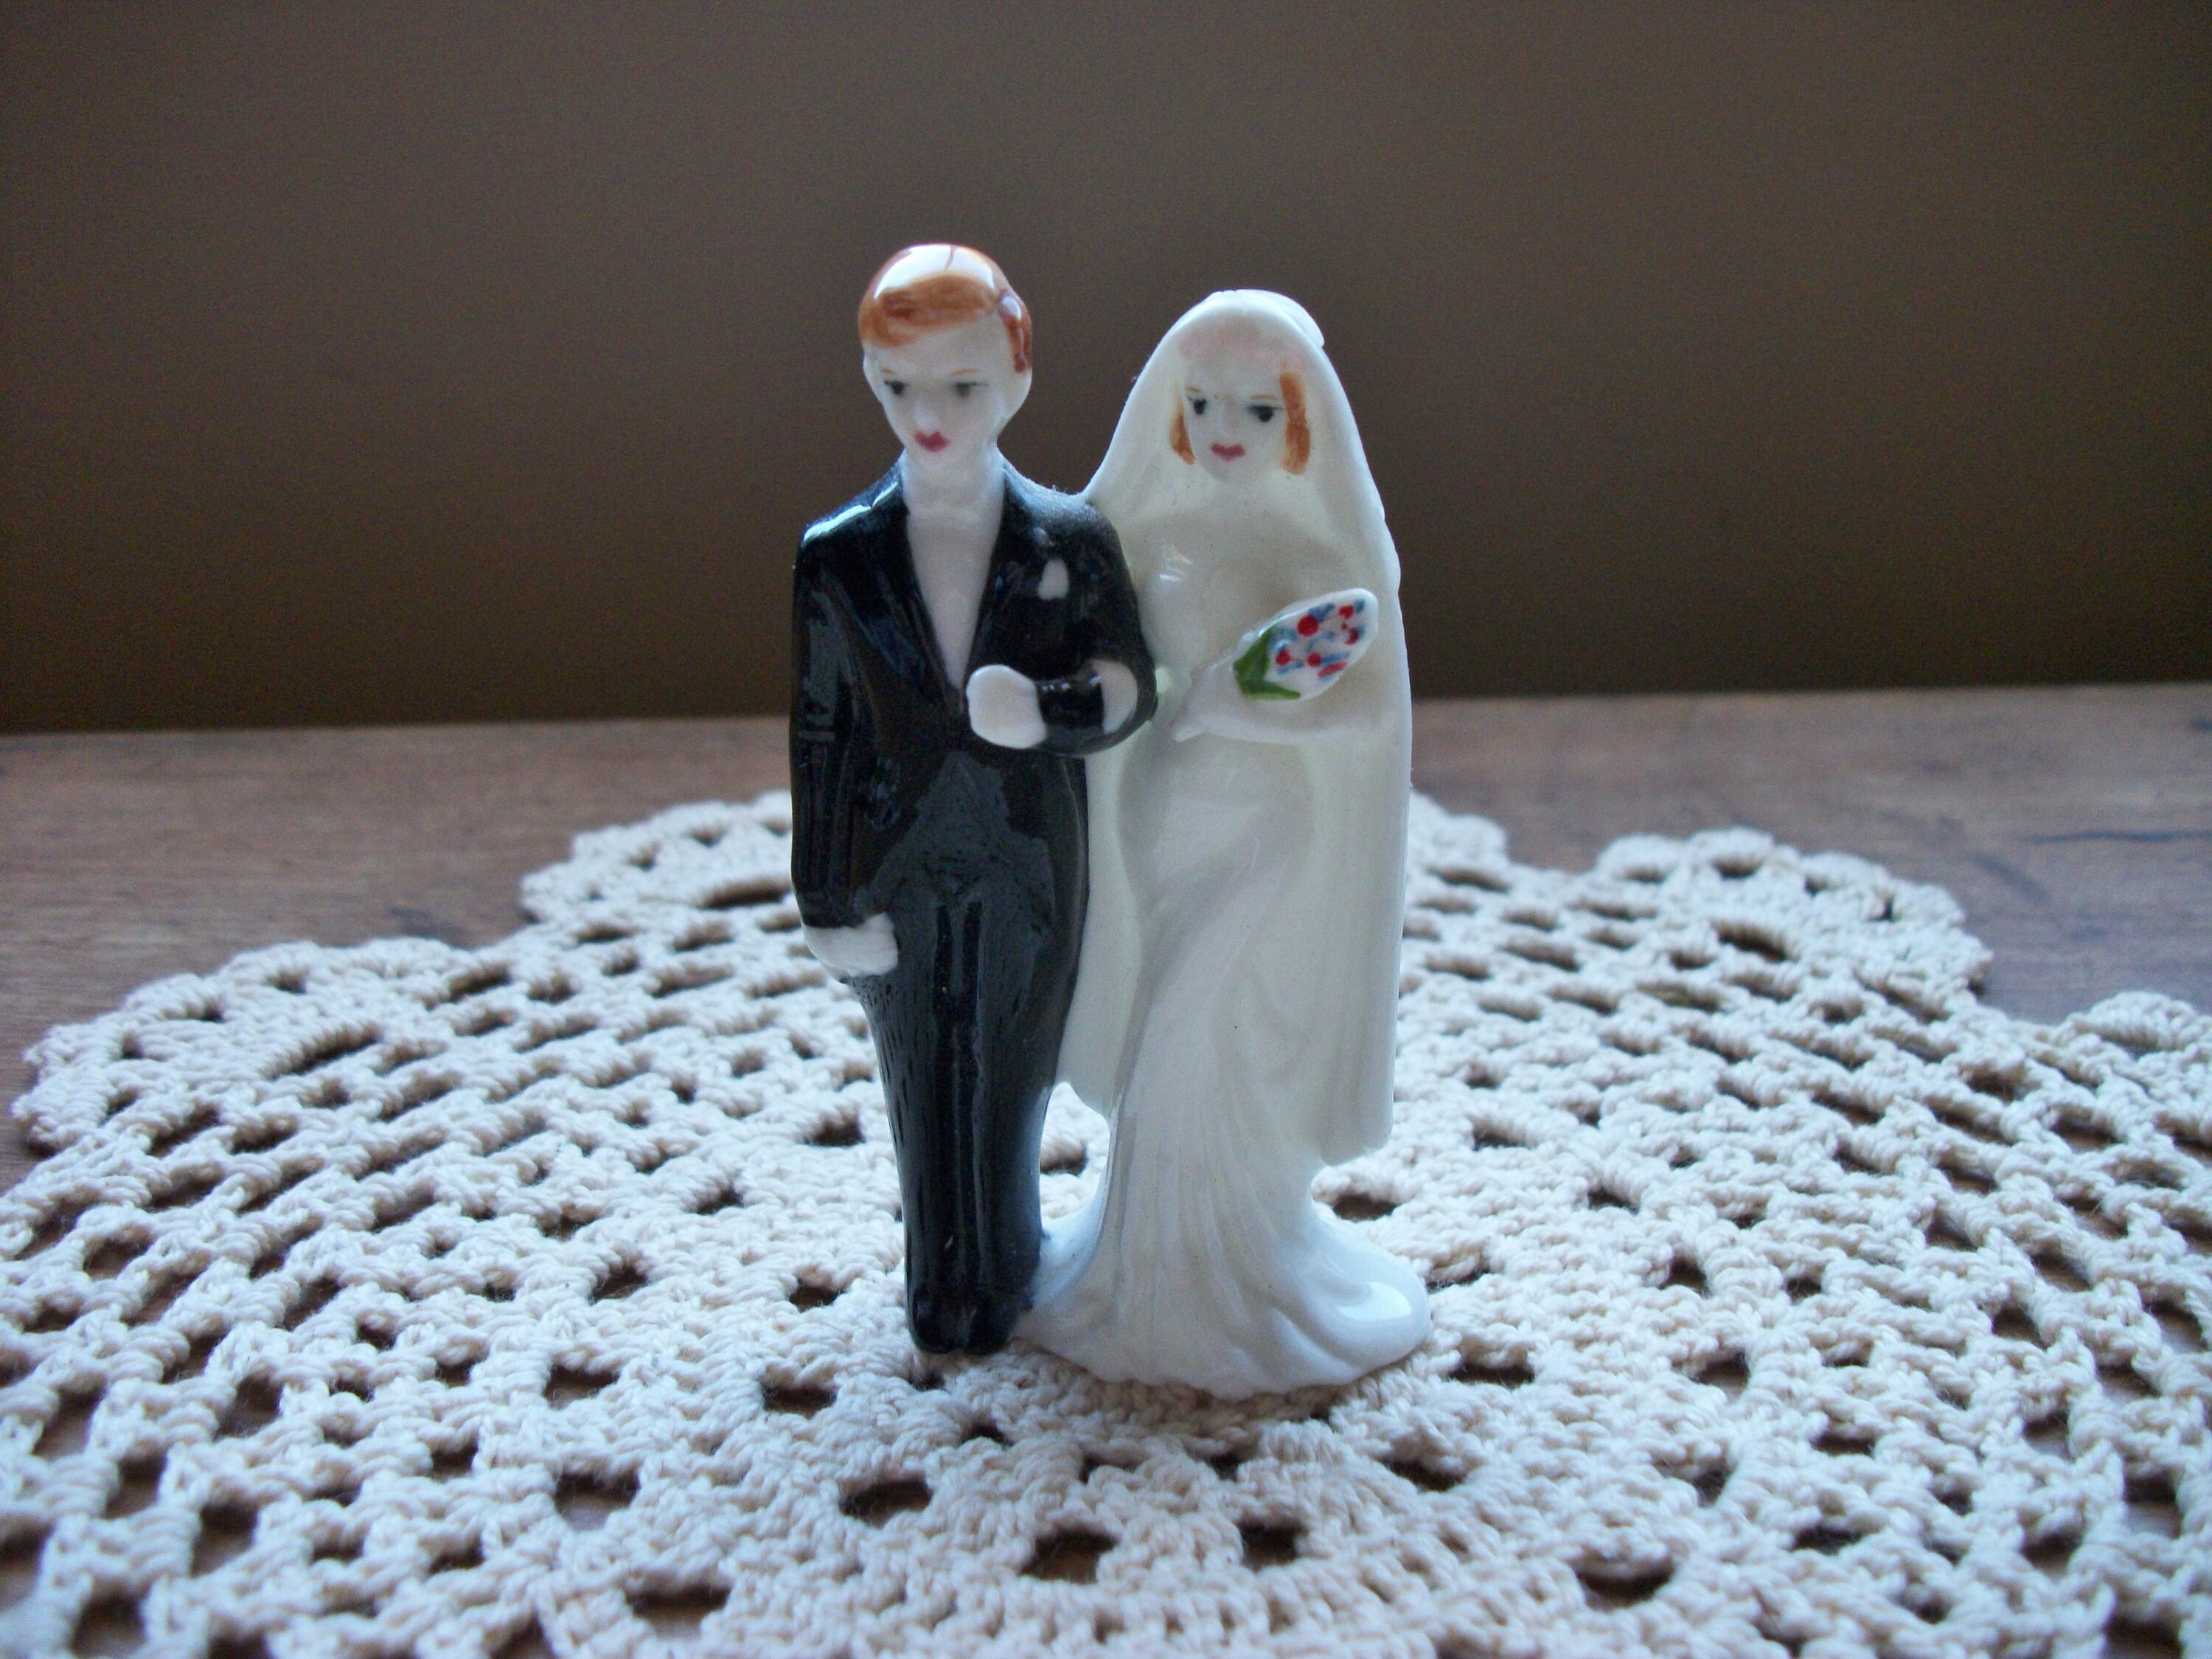 Old Bride and Groom Miniature Toys Vending Machine Sign 